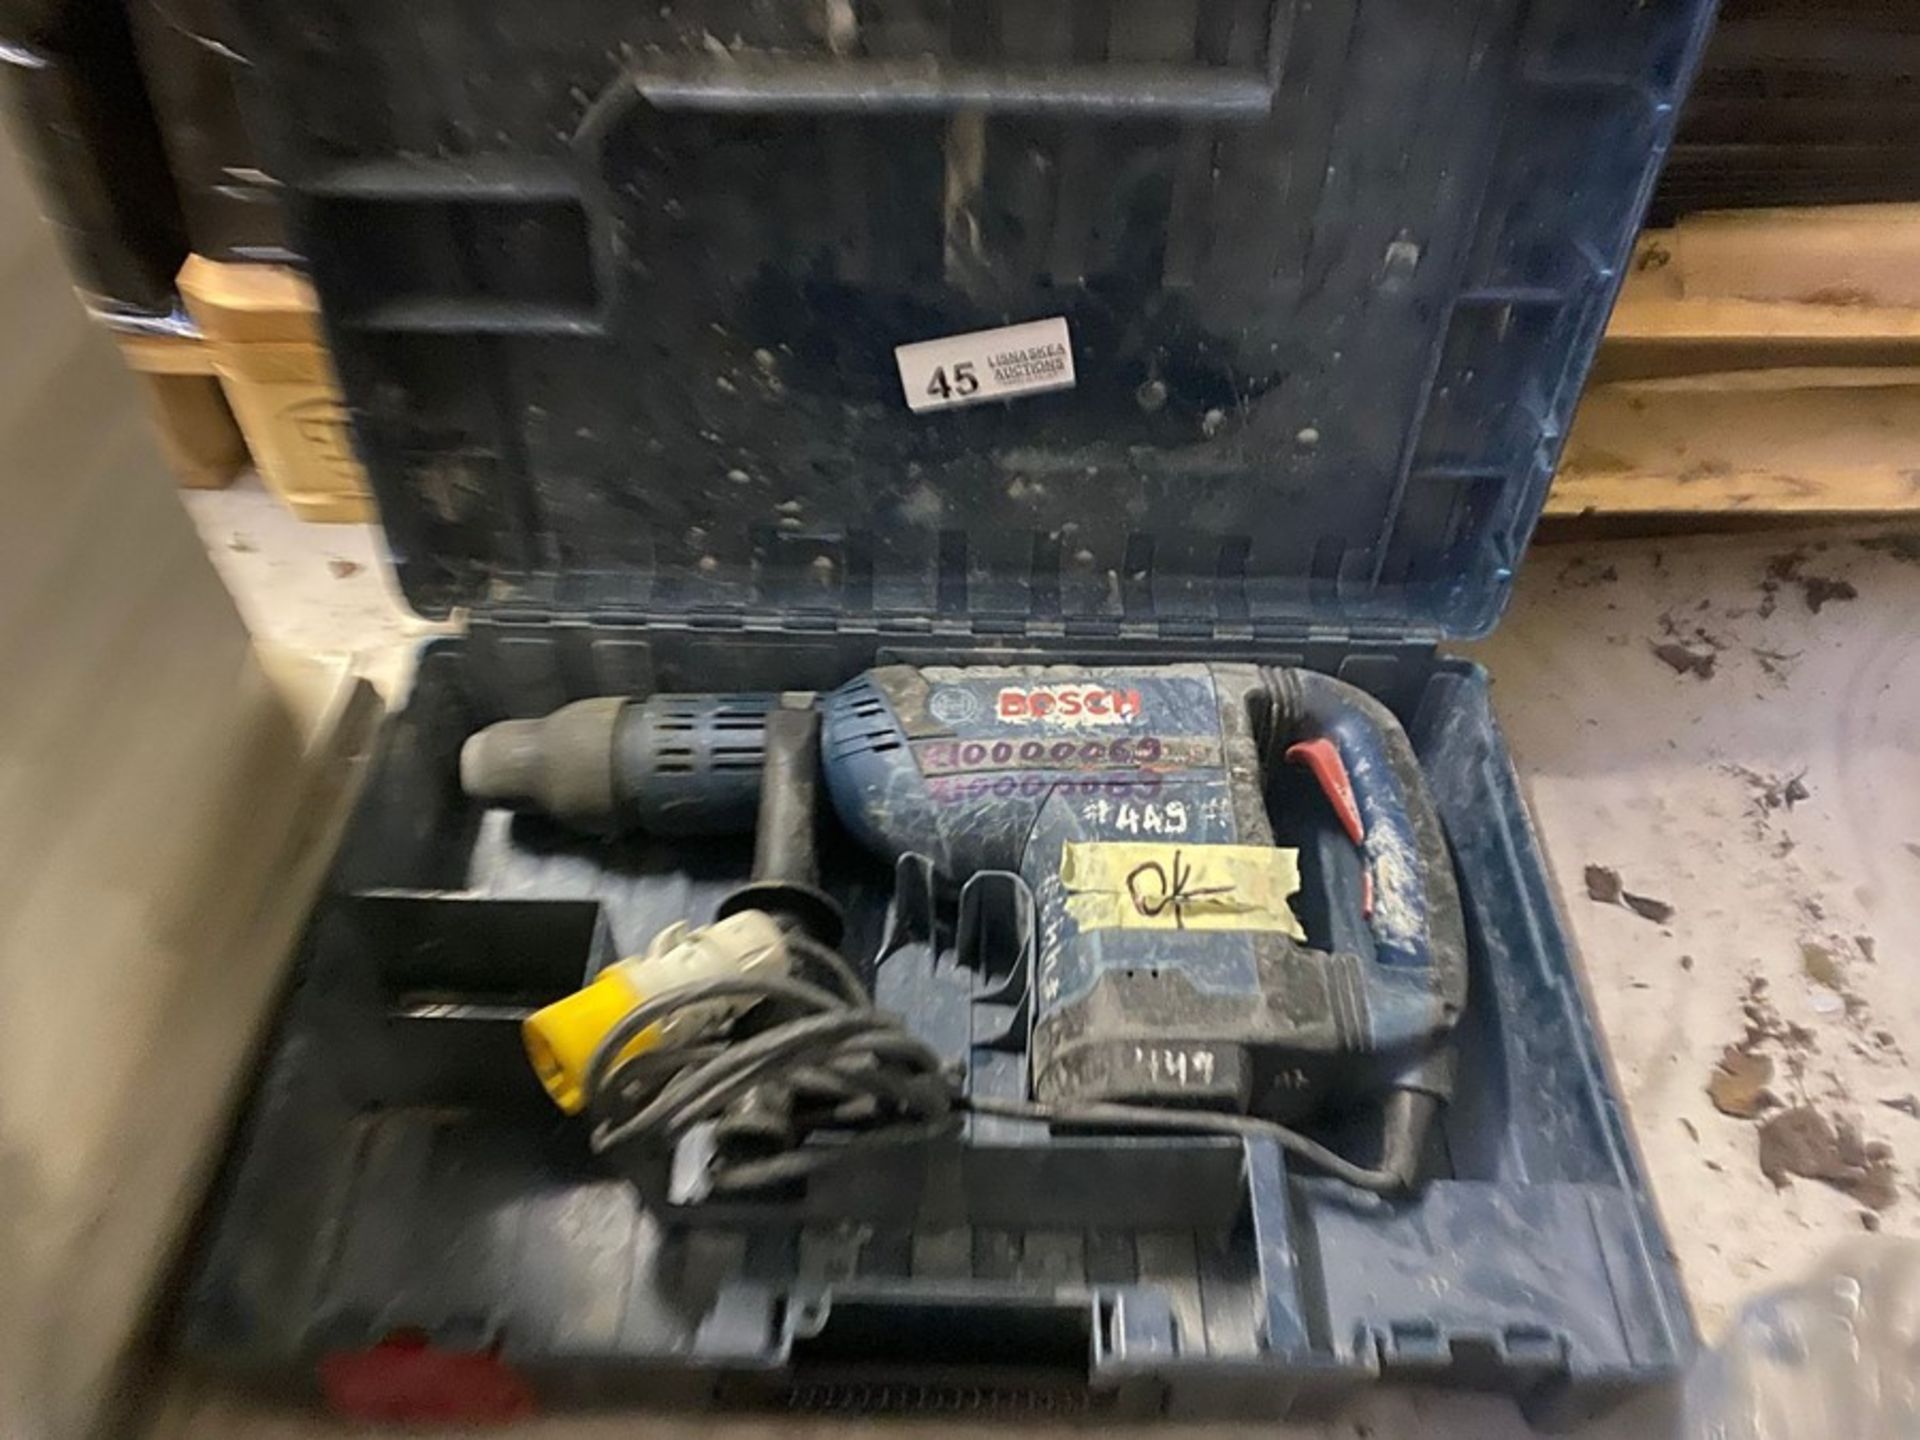 BOSCH PROFESSIONAL GBH 8-45 D 110V HAMMER DRILL (PLUS VAT ON ITEM) (TESTED WORKING)